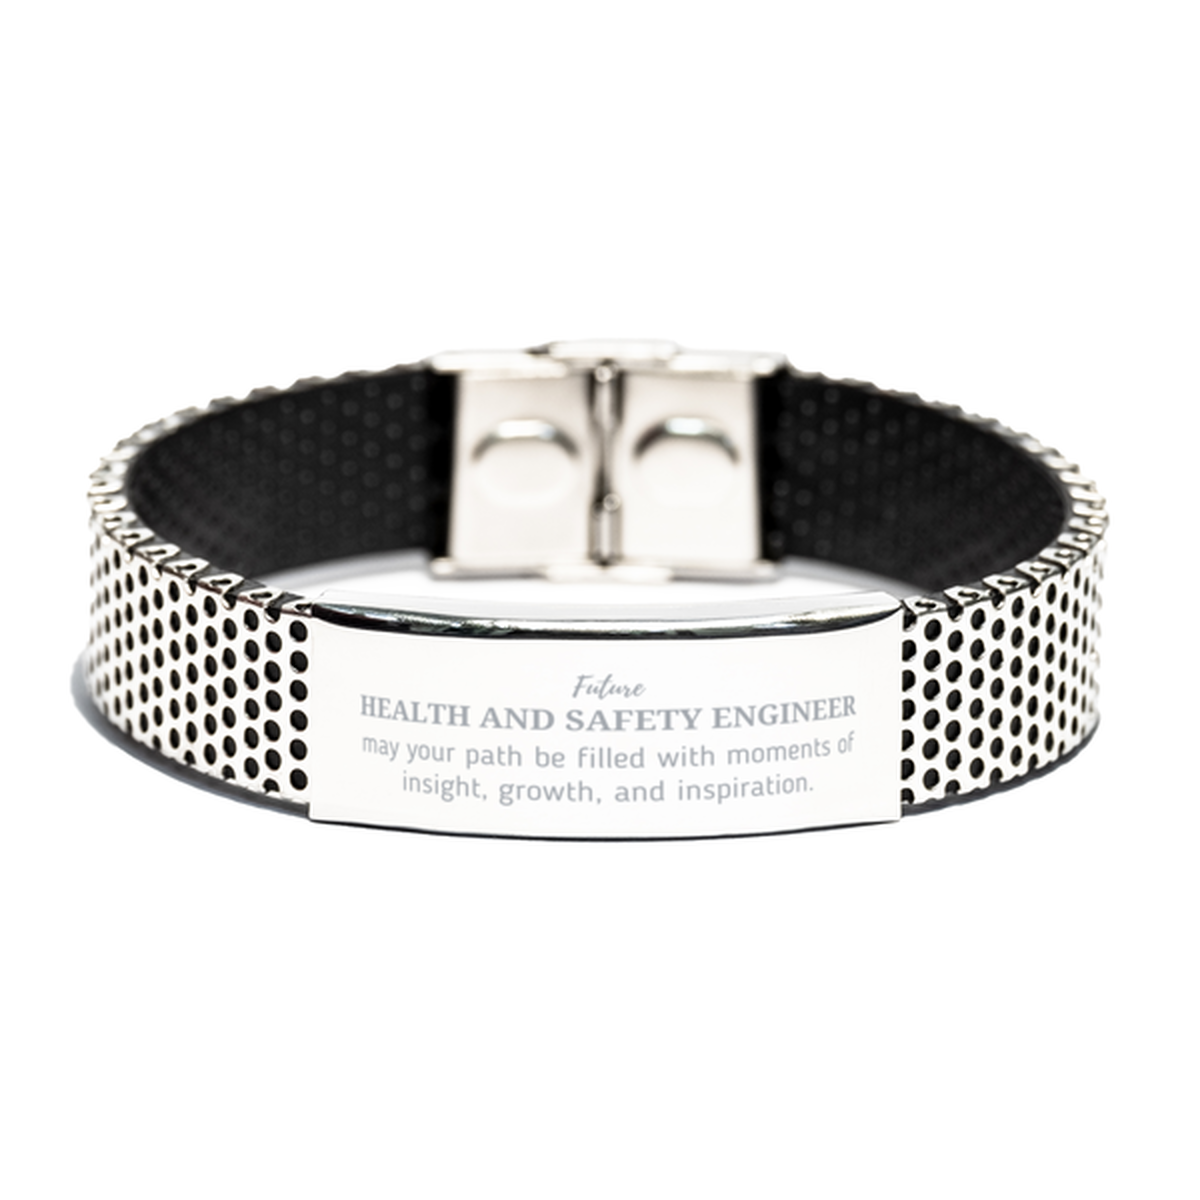 Future Health and Safety Engineer Gifts, May your path be filled with moments of insight, Graduation Gifts for New Health and Safety Engineer, Christmas Unique Stainless Steel Bracelet For Men, Women, Friends